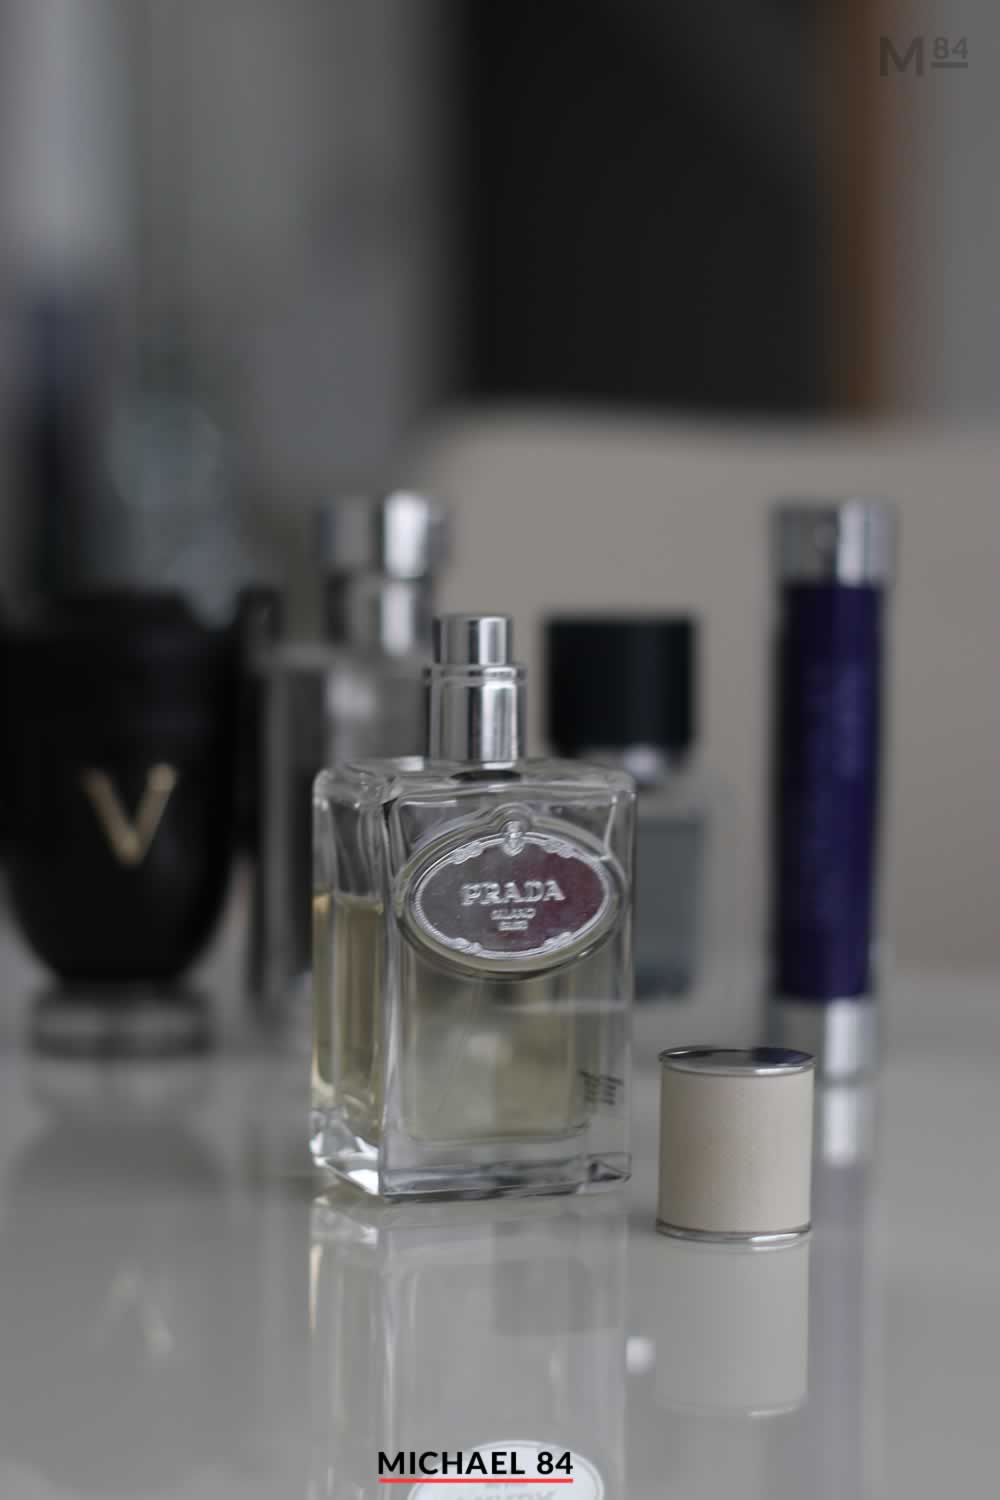 The Best Purple And Violet Fragrances That Smell Amazing | Michael 84